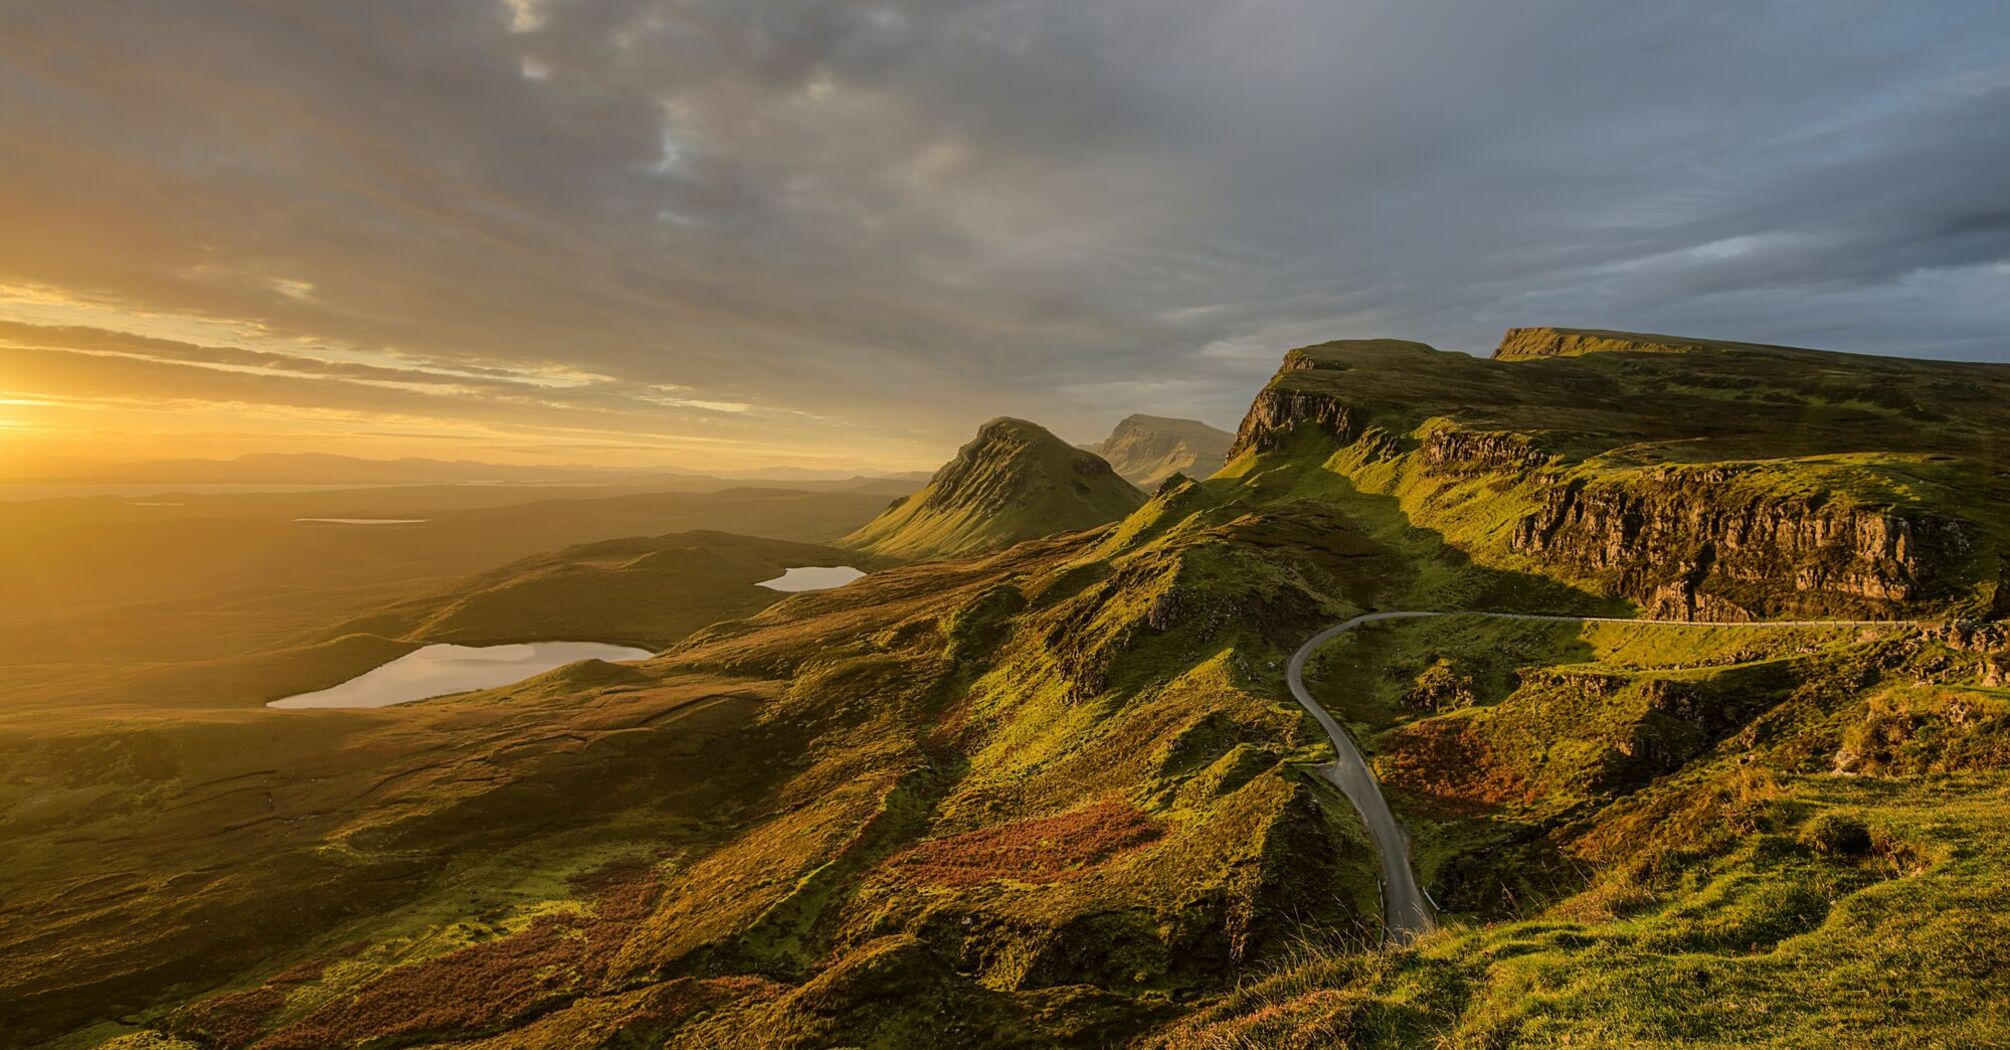 Sunset over the mountains of Skye